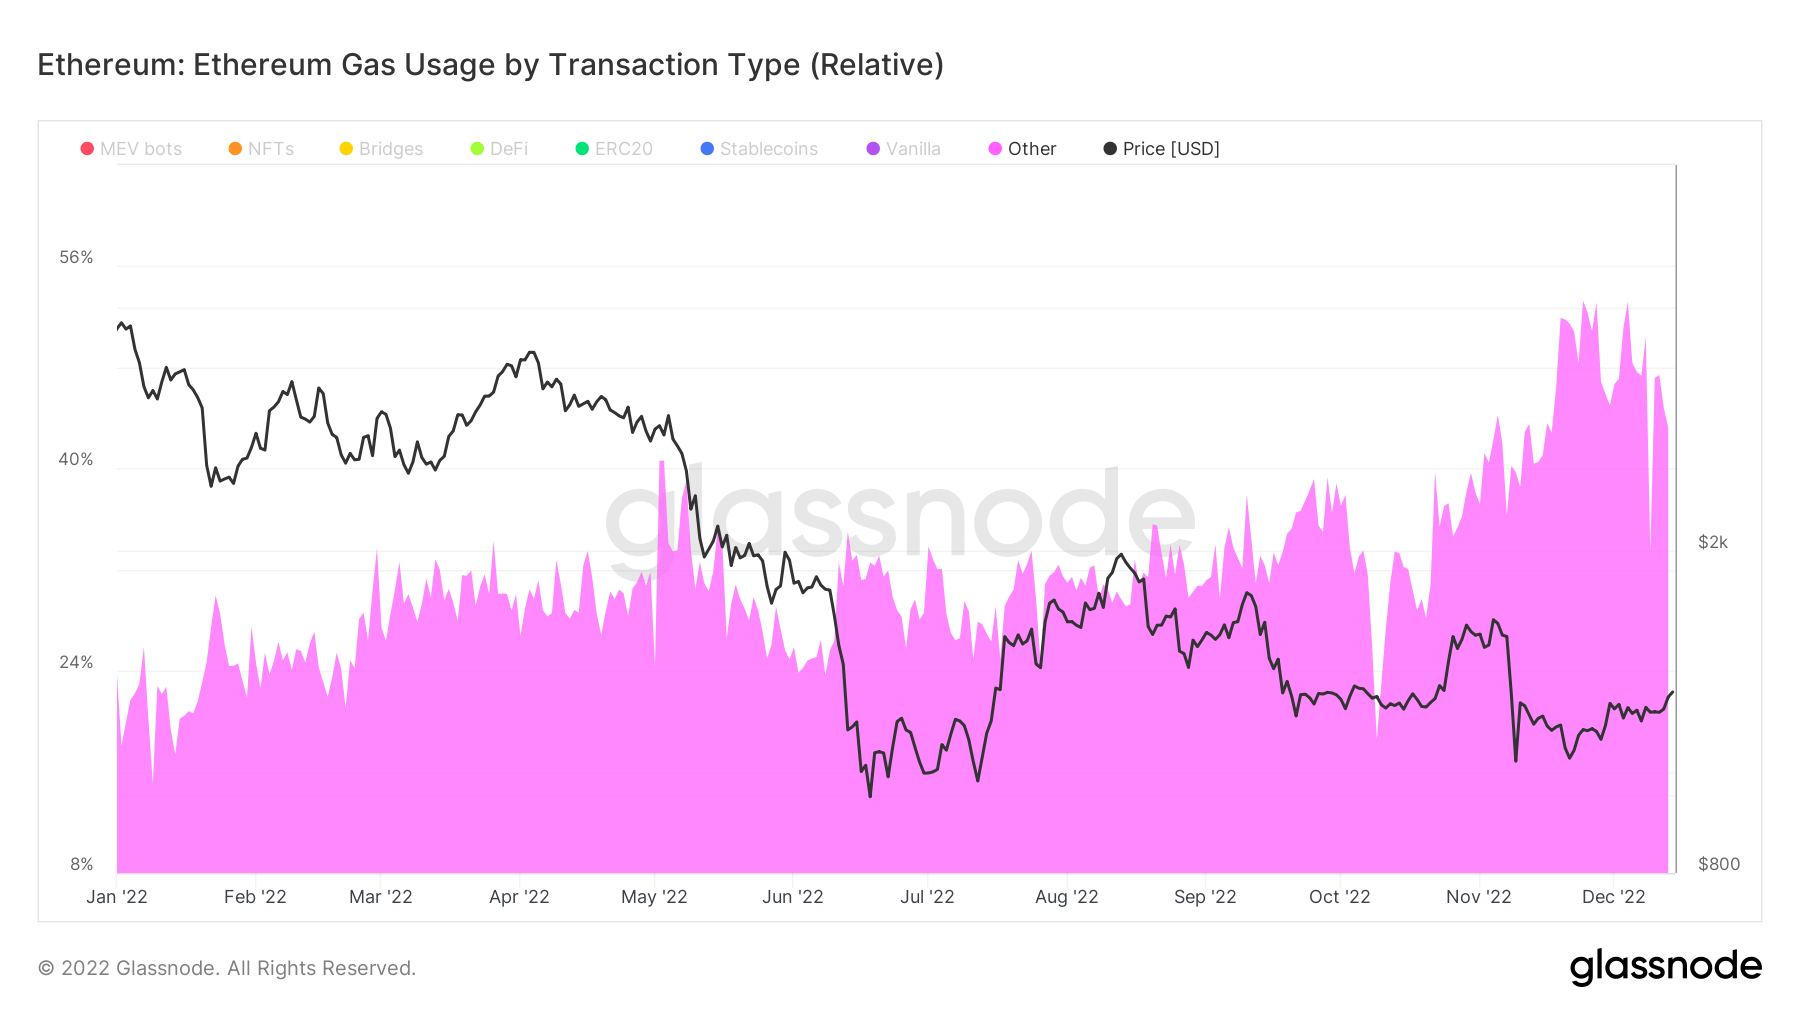 ETH addresses other transactions